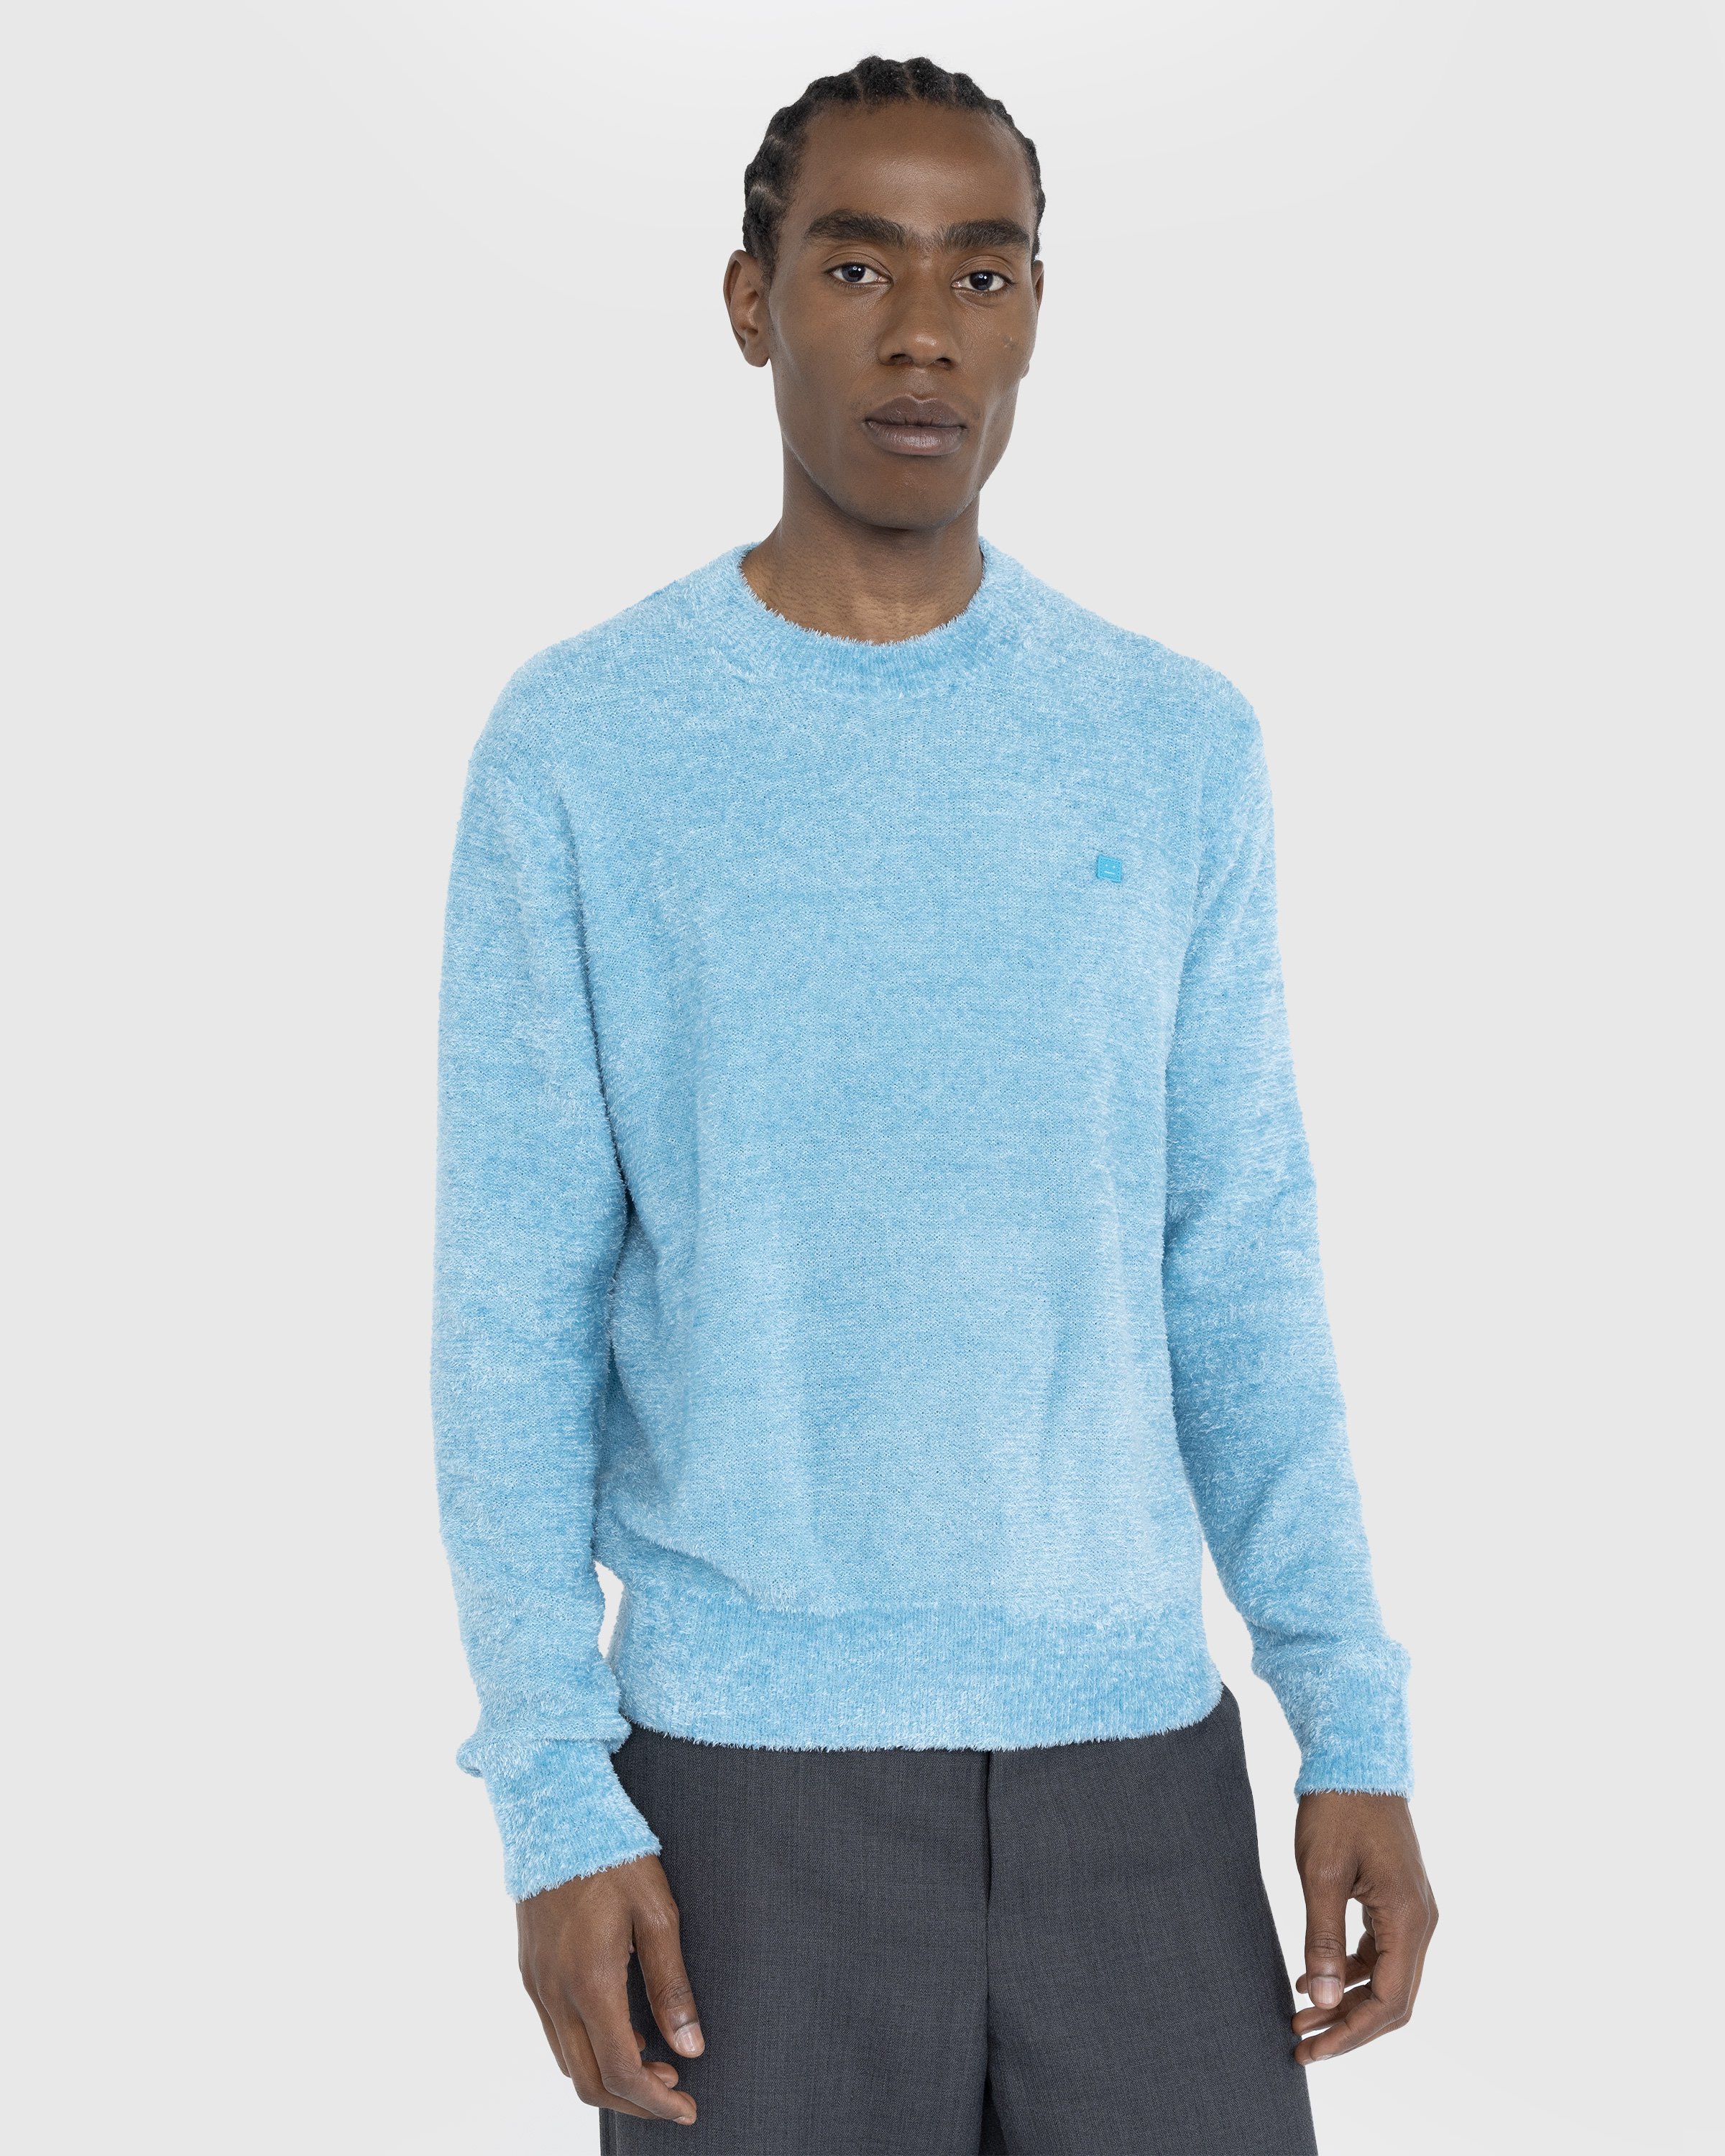 Acne Studios - Textured Sweater Teal Blue - Clothing - Blue - Image 2